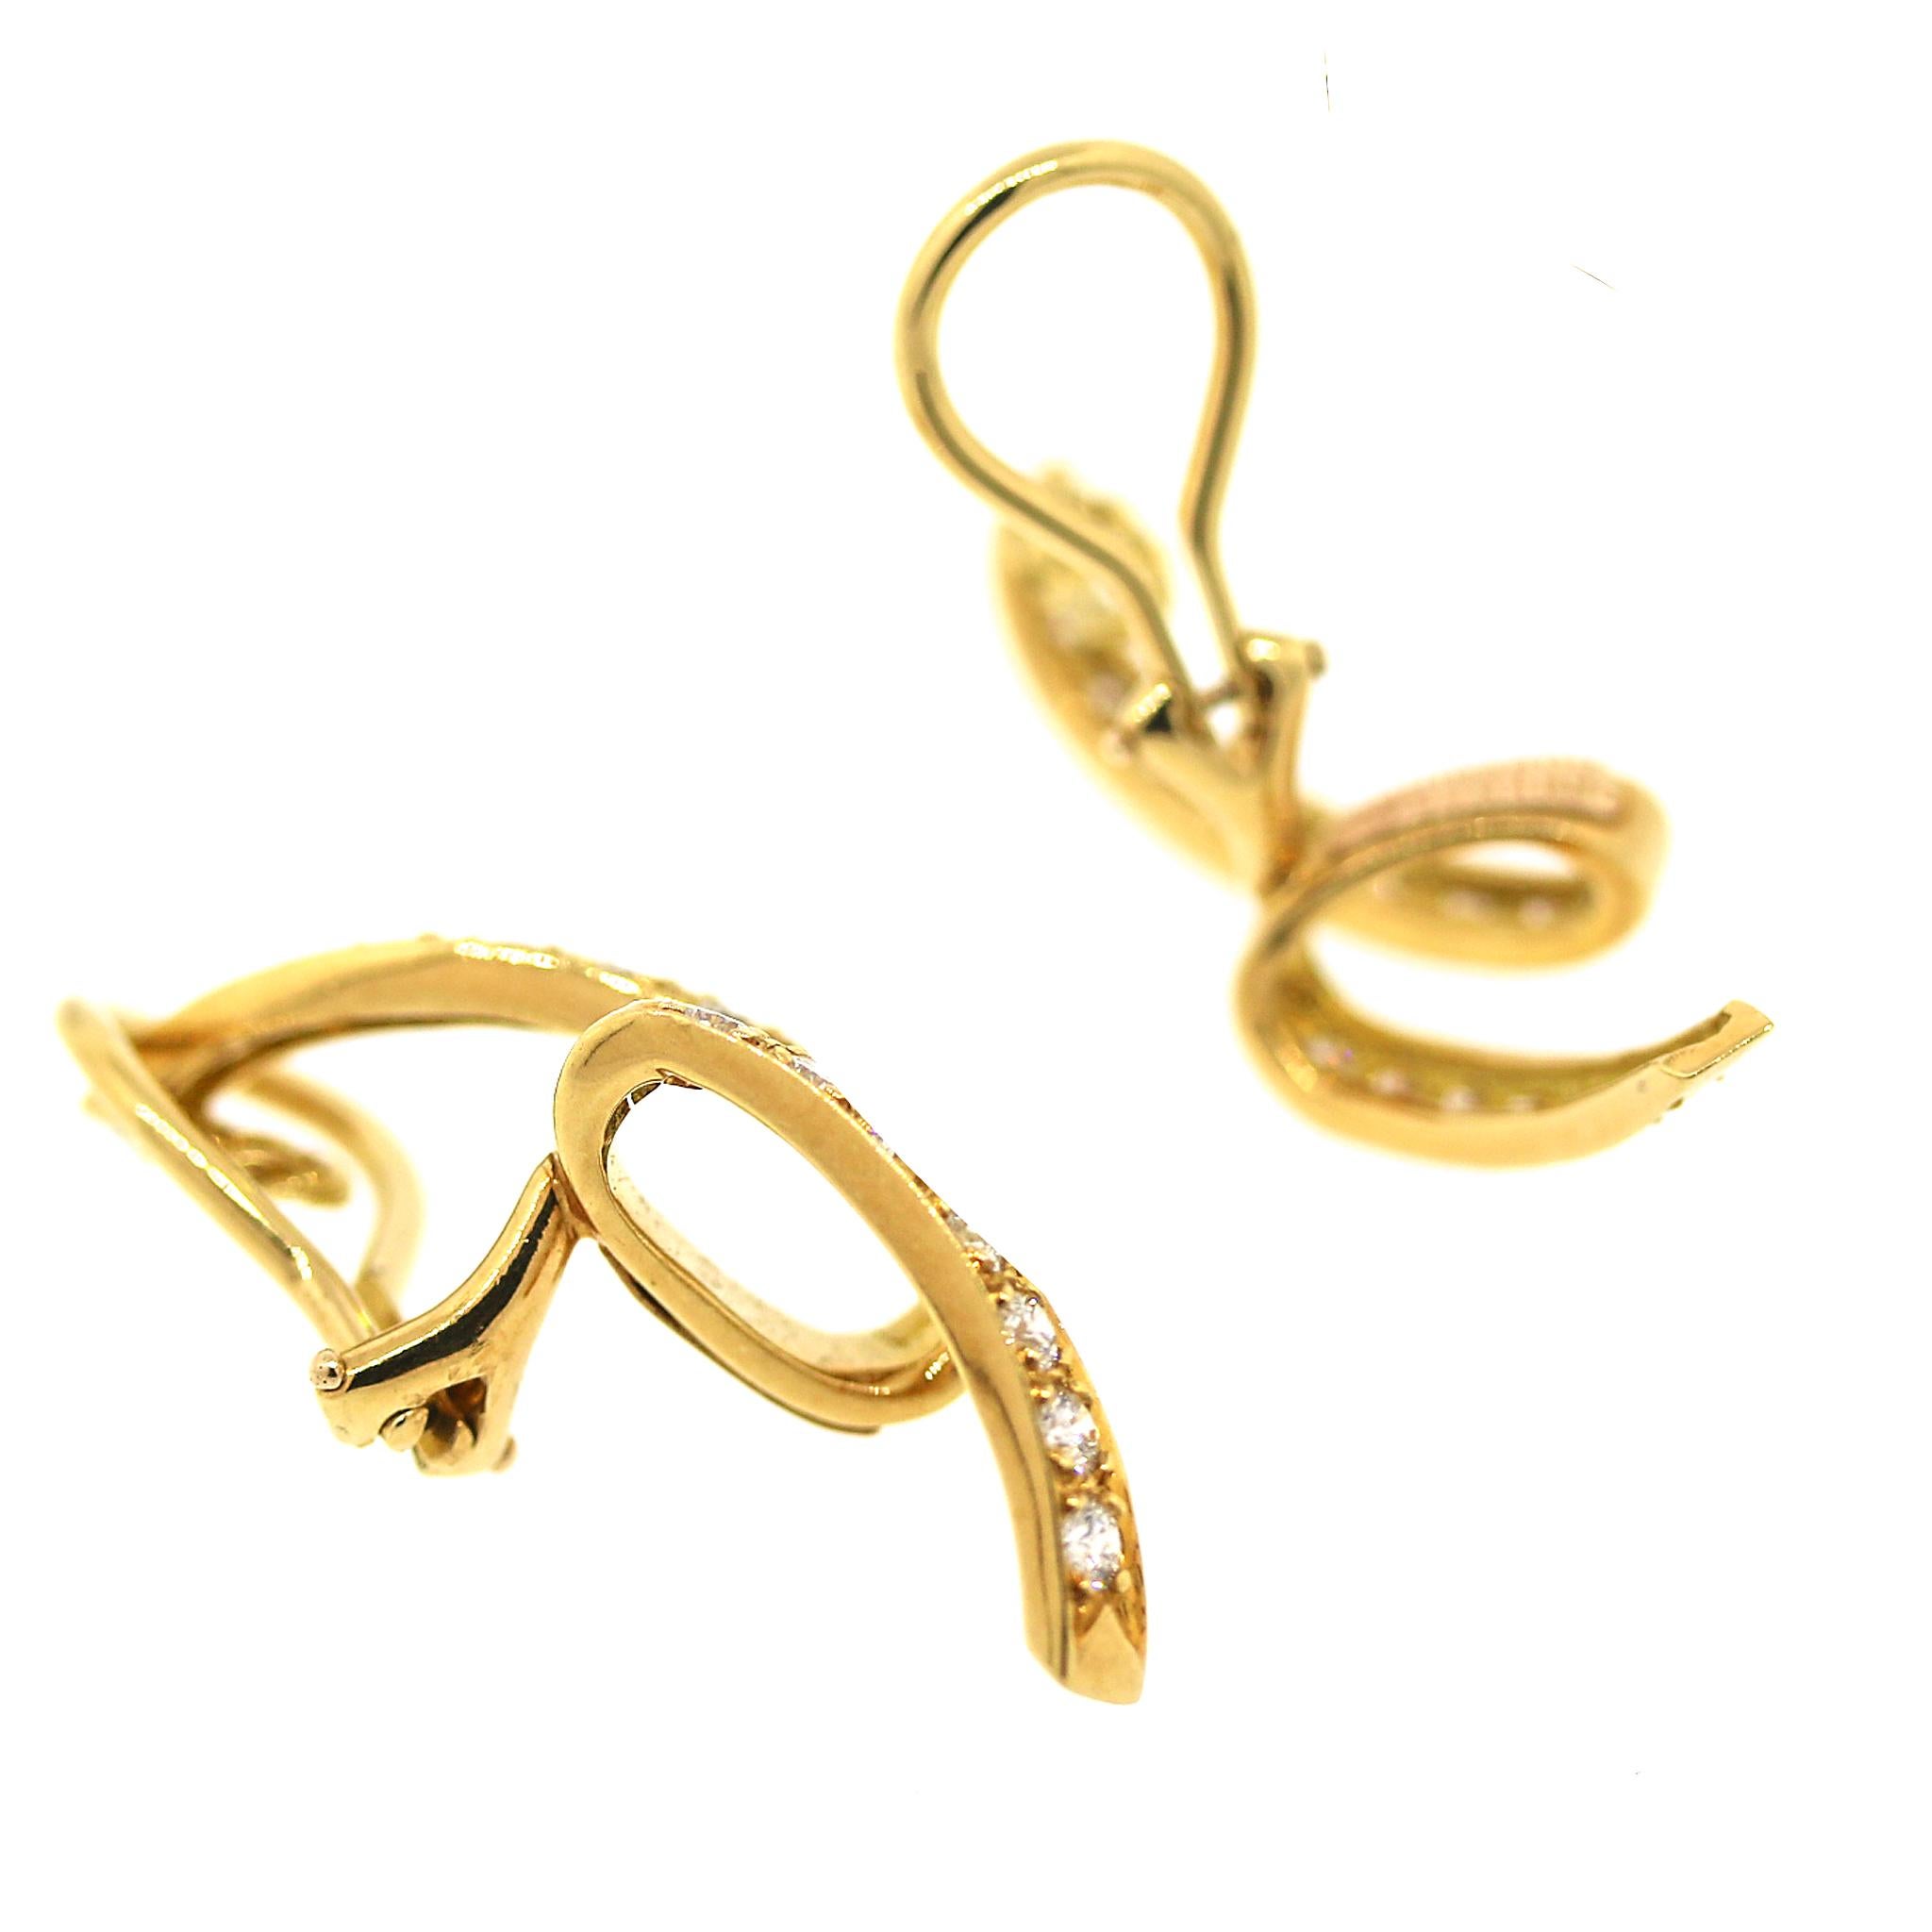 1.05 carats Diamond Swirl Earrings in Yellow Gold In Good Condition For Sale In New York, NY